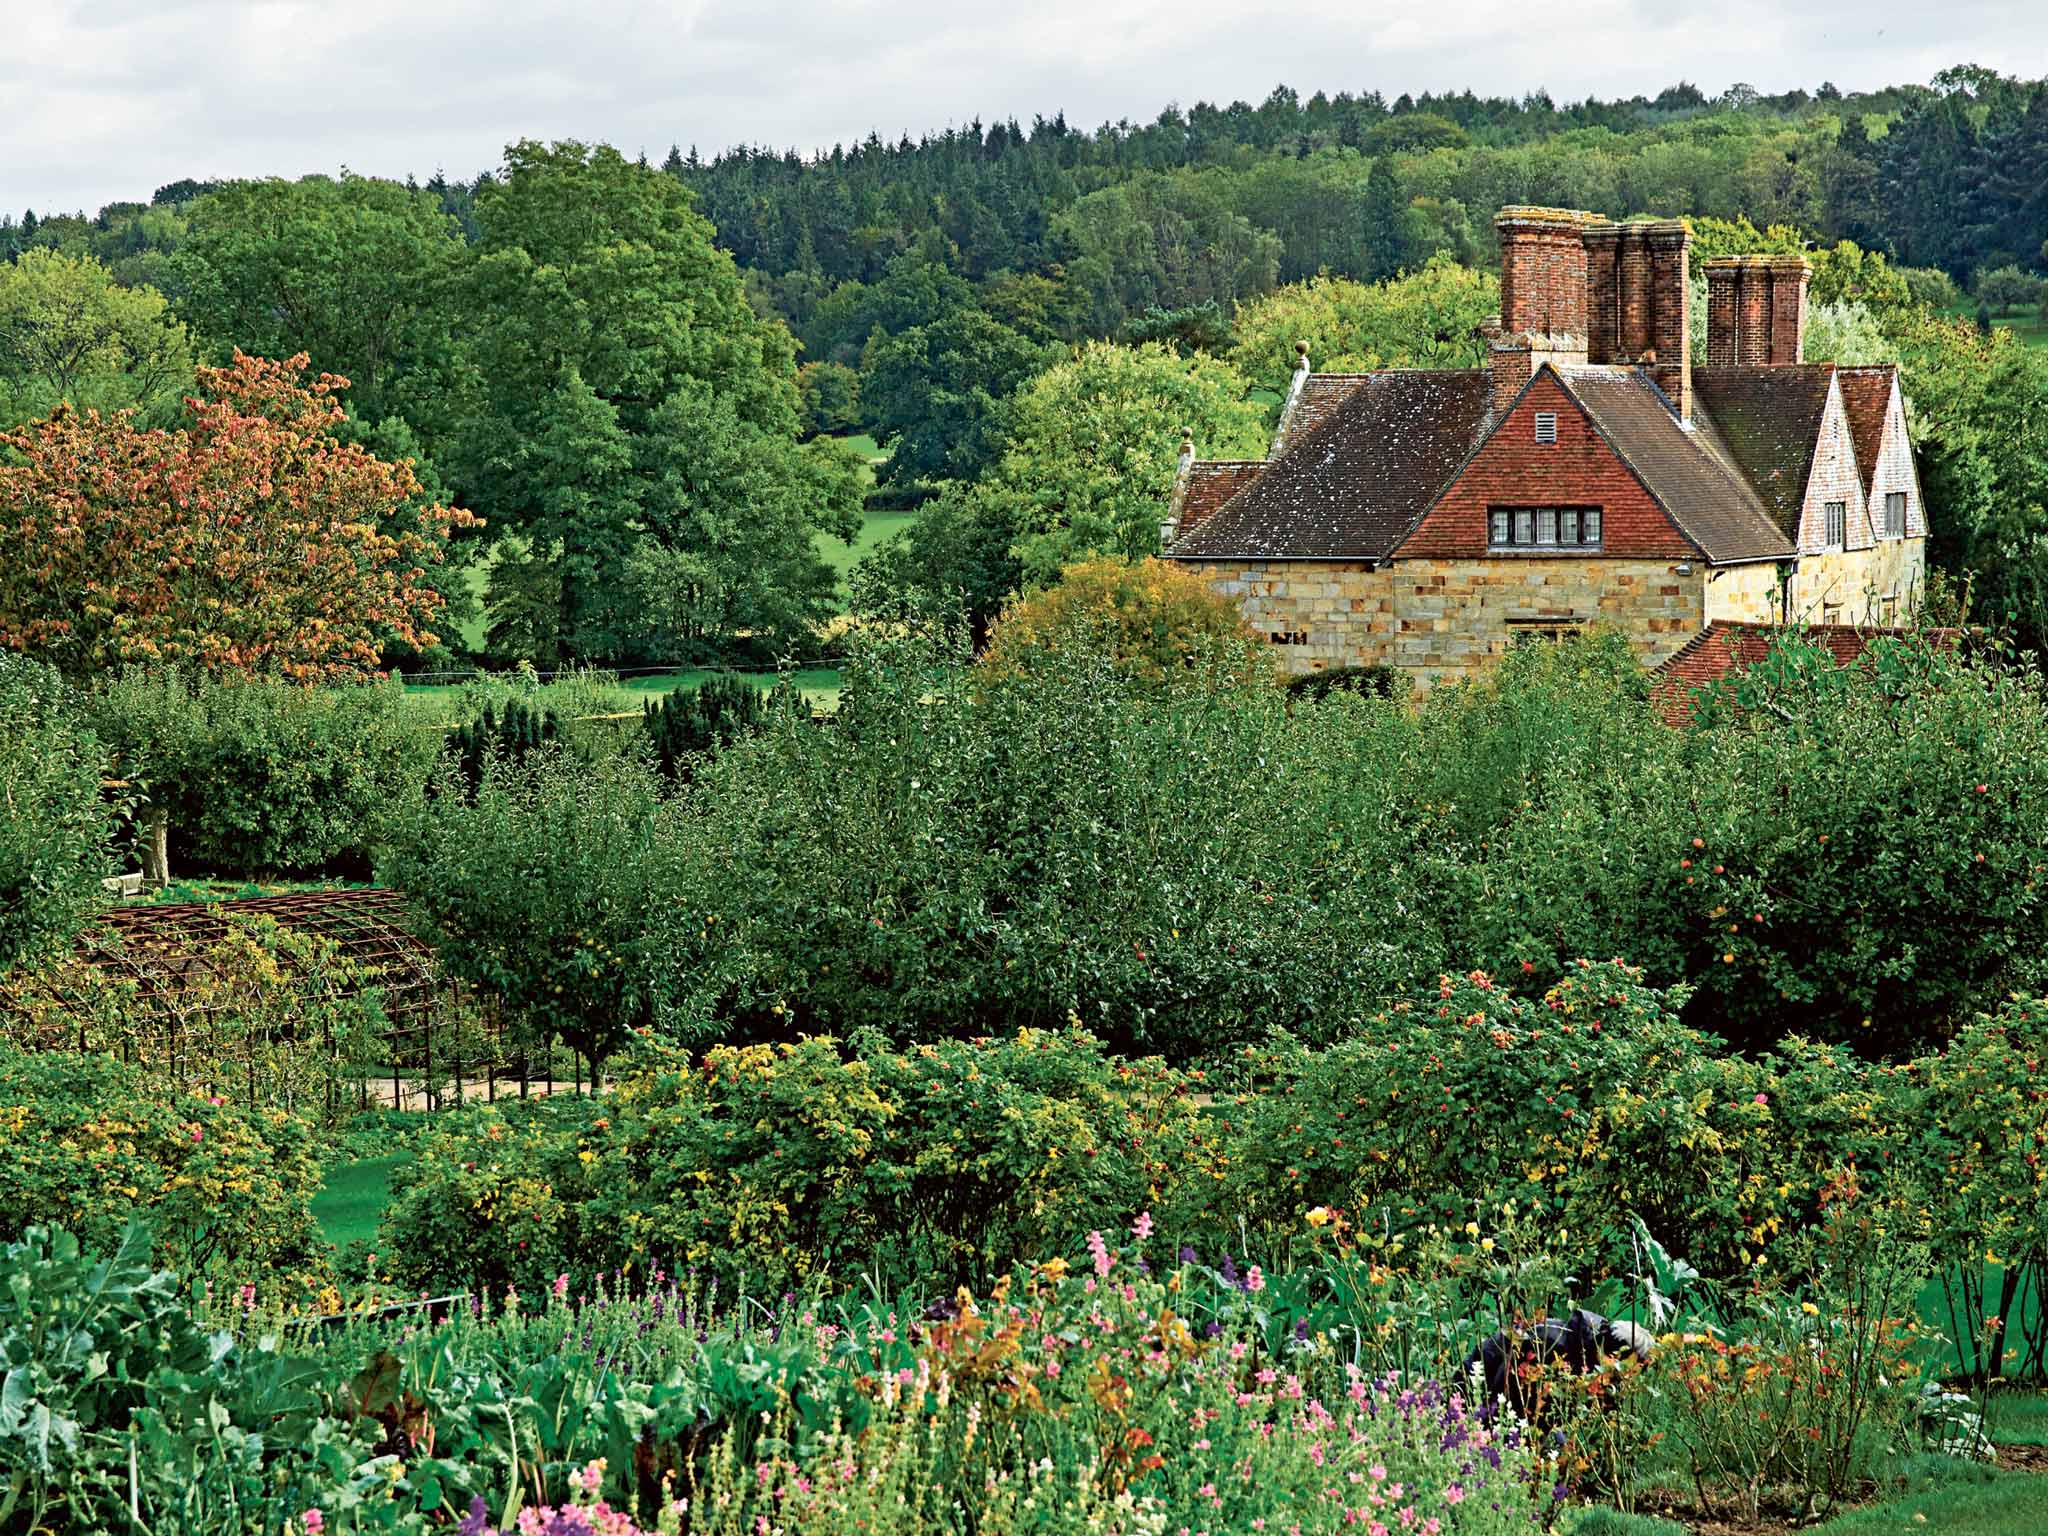 The vegetable patch and orchard in Rudyard Kipling's gardens at Batemans in East Sussex, paid for by his Nobel Prize for Literature winnings